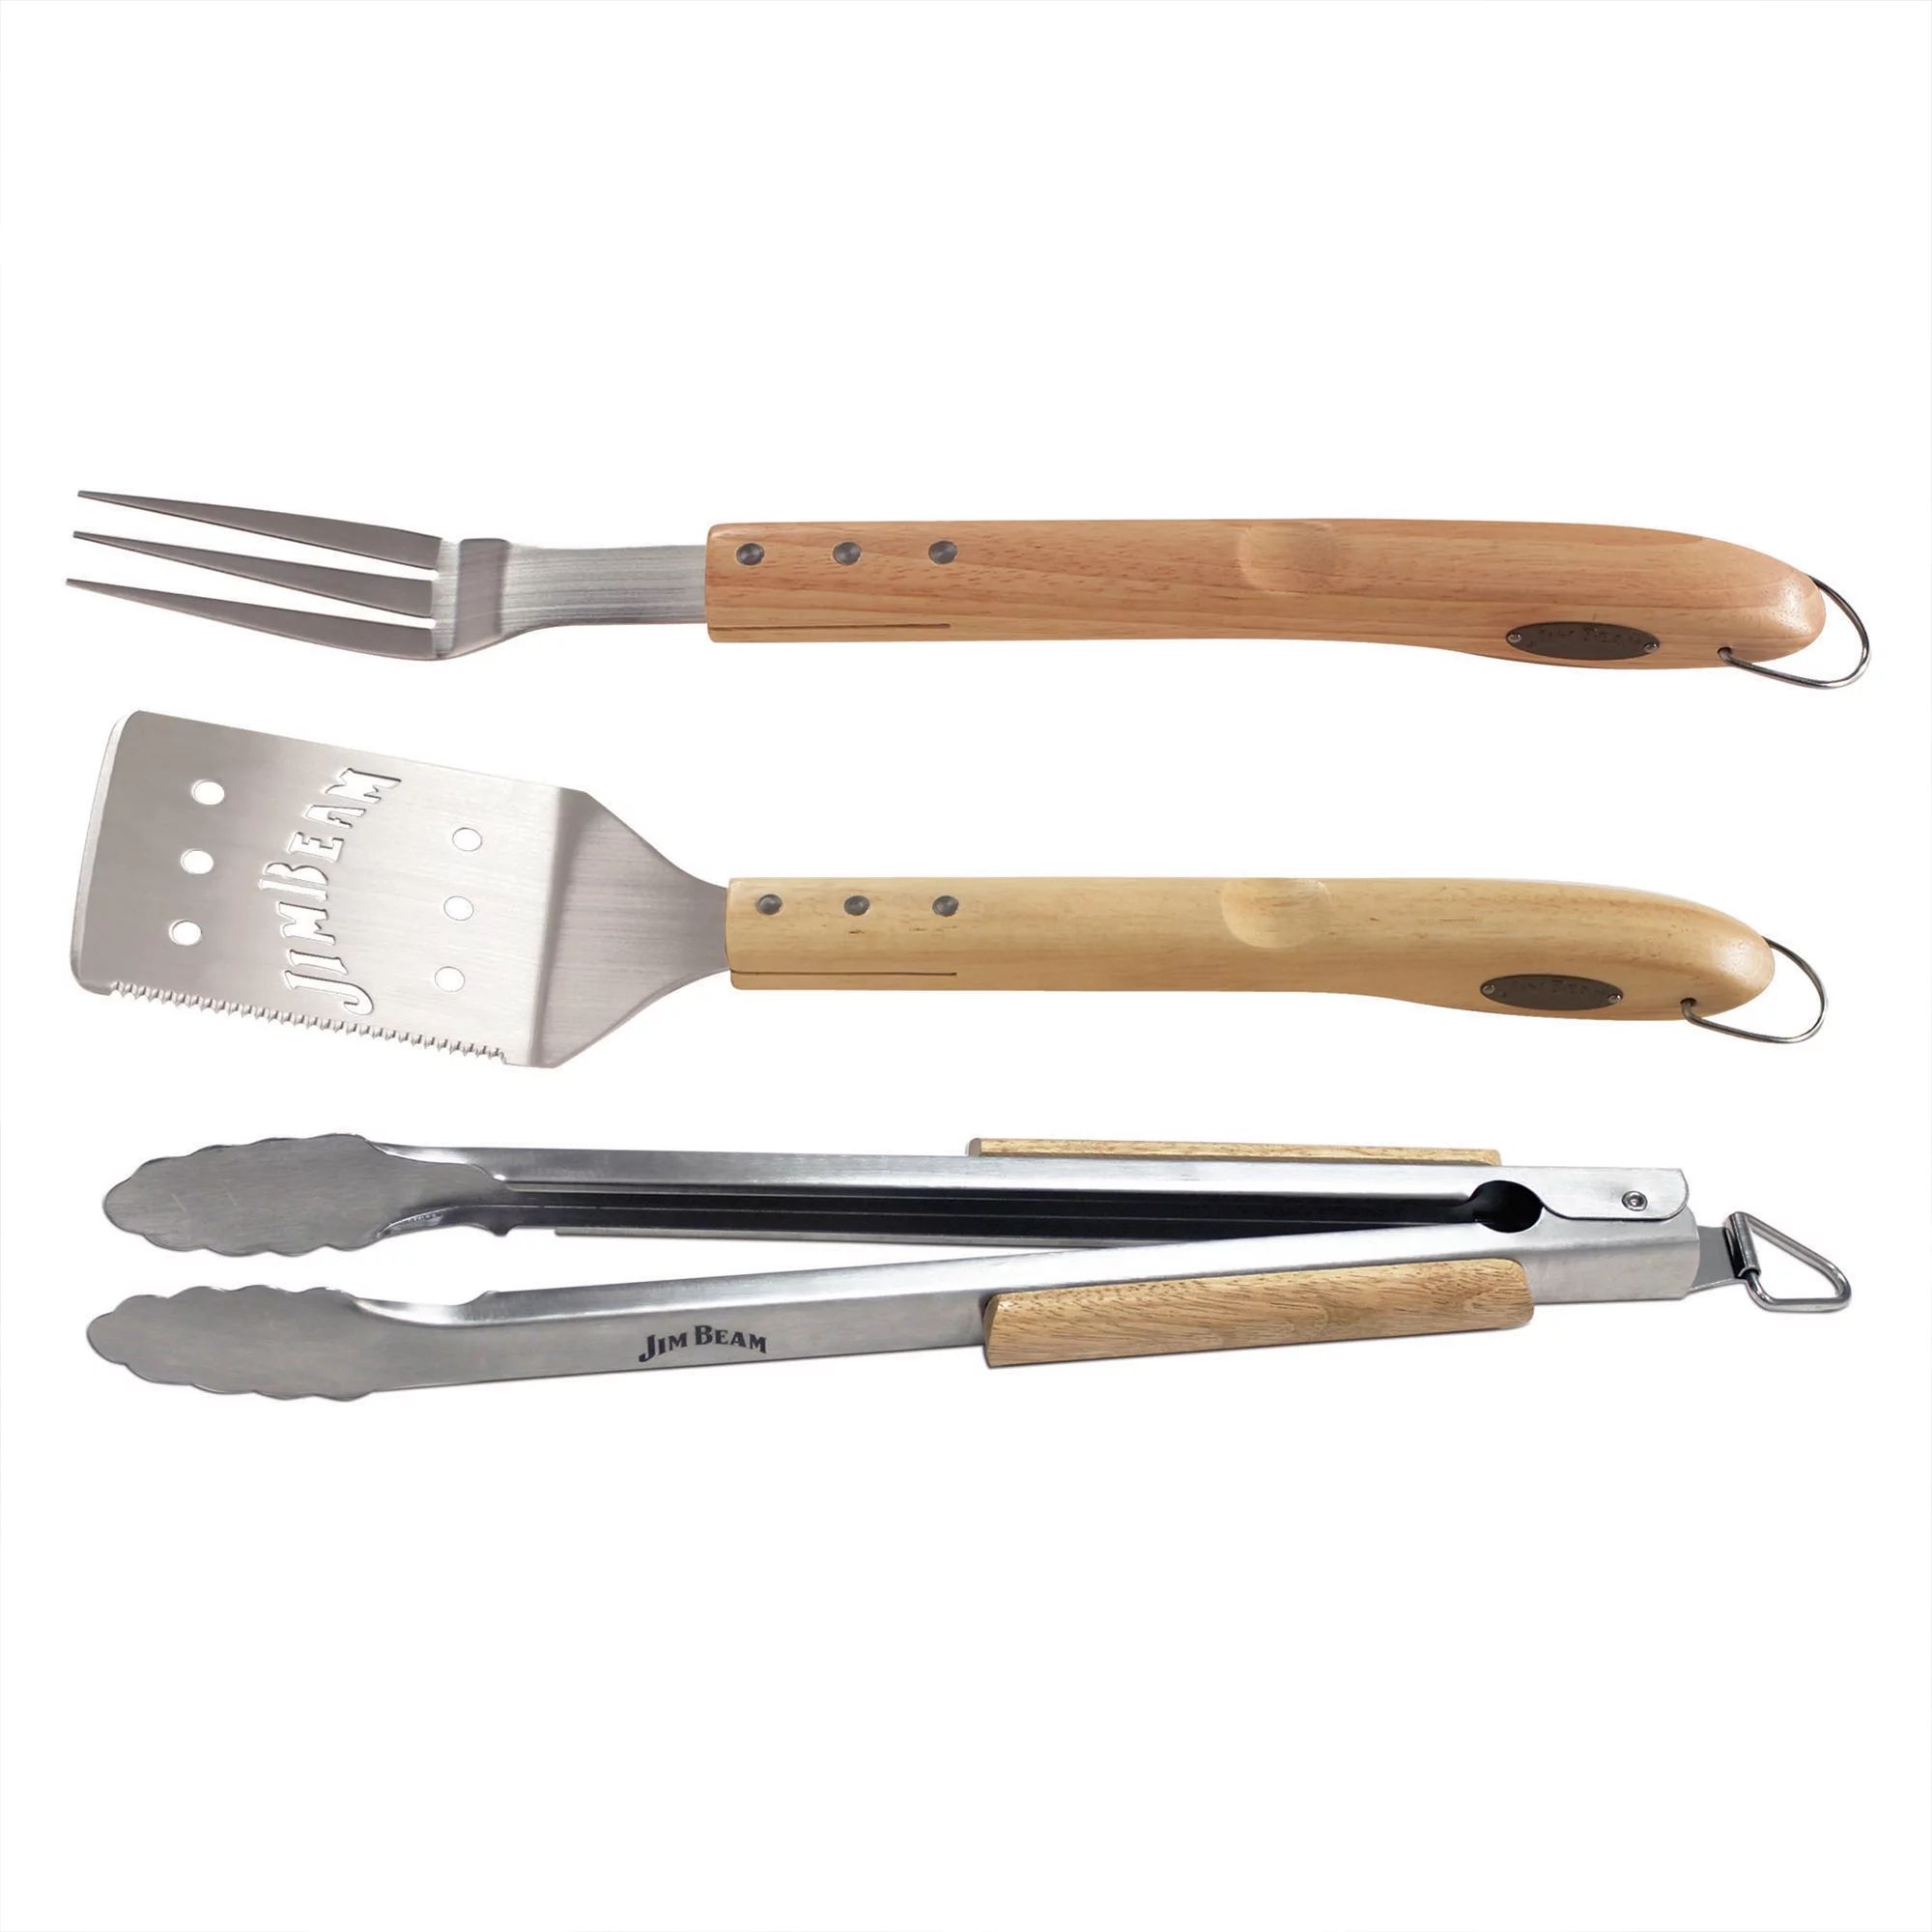 Jim Beam 3-Piece Grilling/Barbecue Tool Set with Wooden Handles Includes - Spatula, Fork and Tong... | Walmart (US)